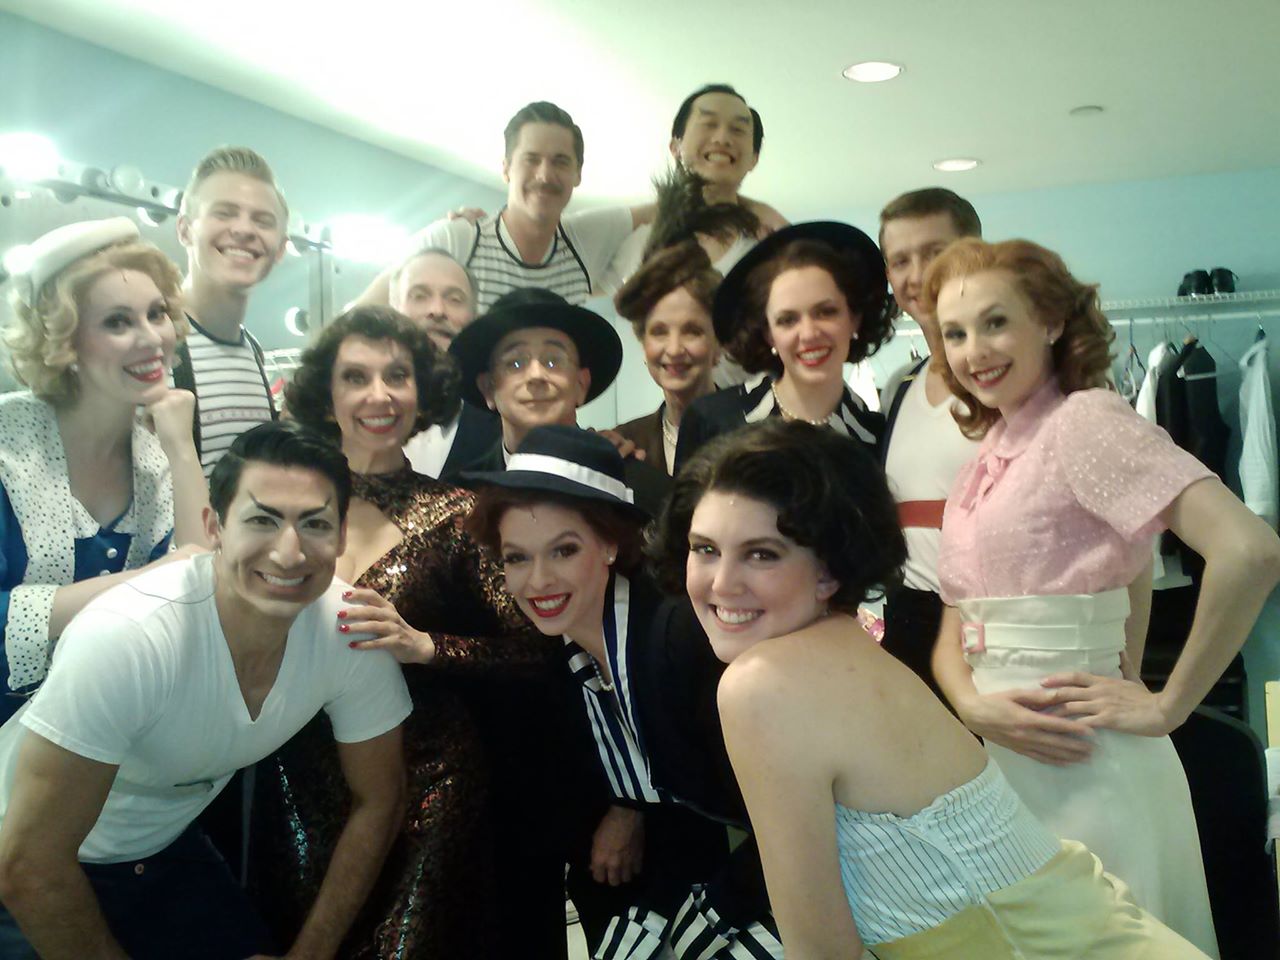 Backstage with the cast of "Anything Goes" at Phoenix Theatre (2015). Photo from David Barker's Facebook collection. Among those pictured: Ashley Stults, Cooper Hallstrom, Nikko Kimzin, Debby Rosenthal, Jon Gentry, Nic Bryan, Kate E Cook, Christy Welty, Charles Pang, Shelby Jensen, Claire Flatz, Ryan David Kleinman and Trisha Ditsworth.